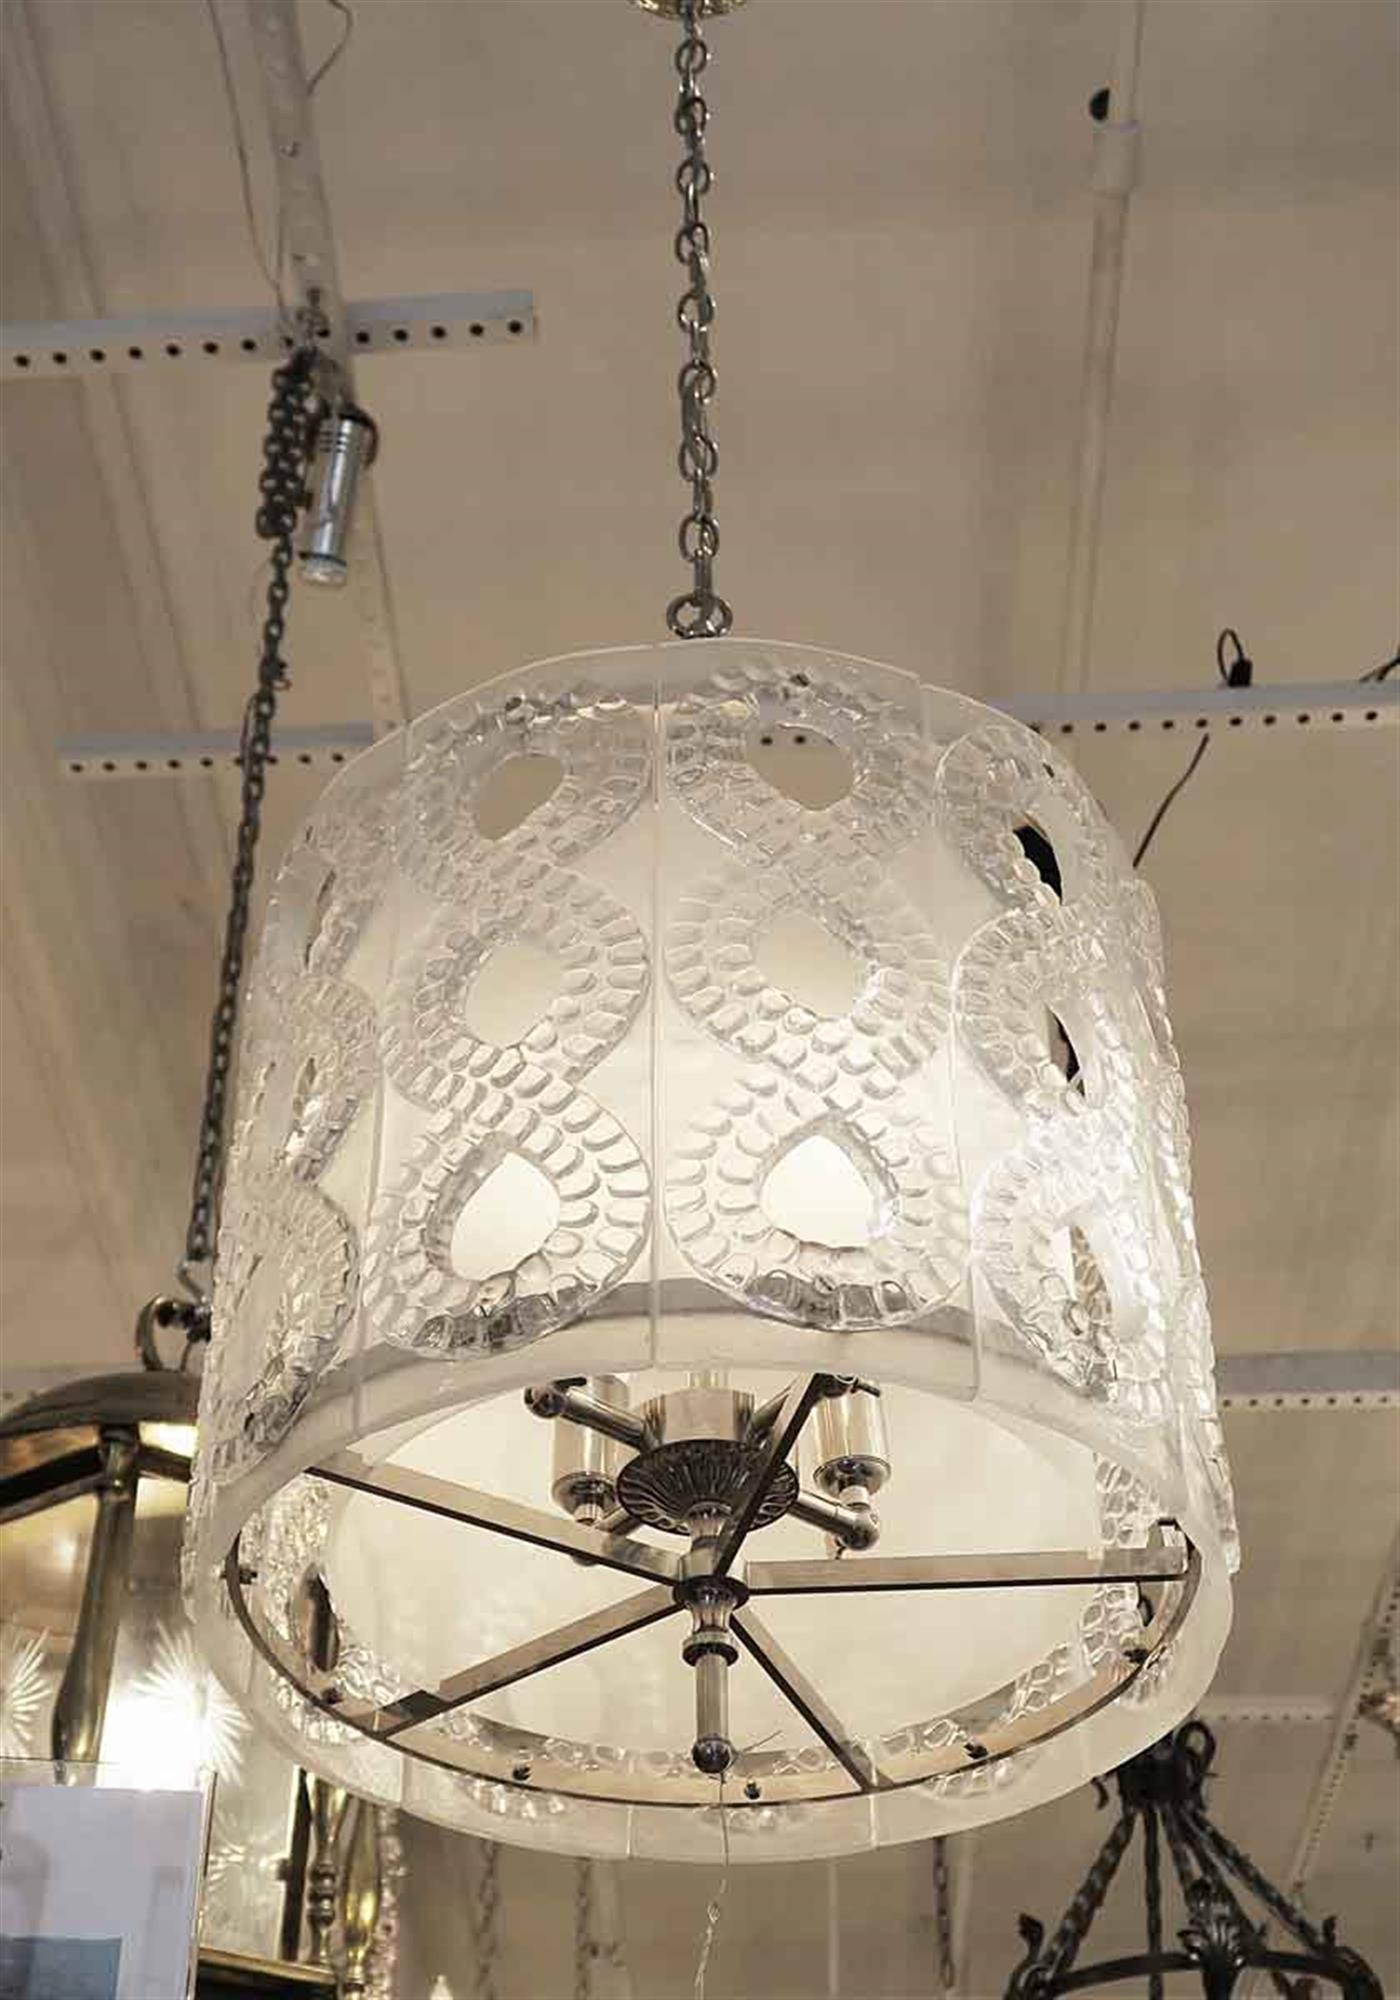 1990s molded crystal light with 11 panels, an inner frosted glass circular shade and a polished nickel frame and chain. Styled after the 1950s 